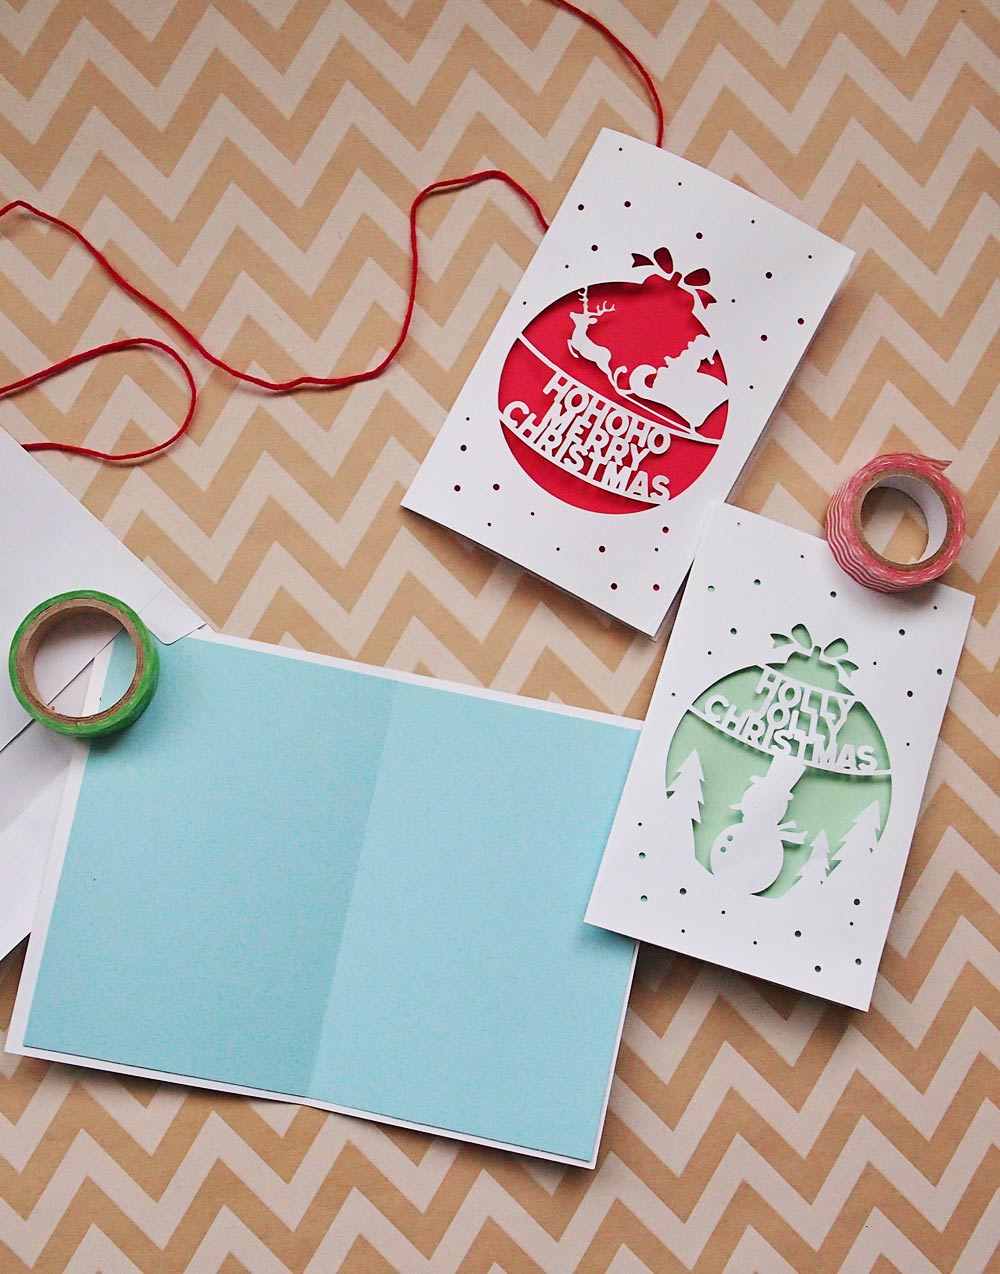 Make Your Own Christmas Cutout Cards! (Free Download)